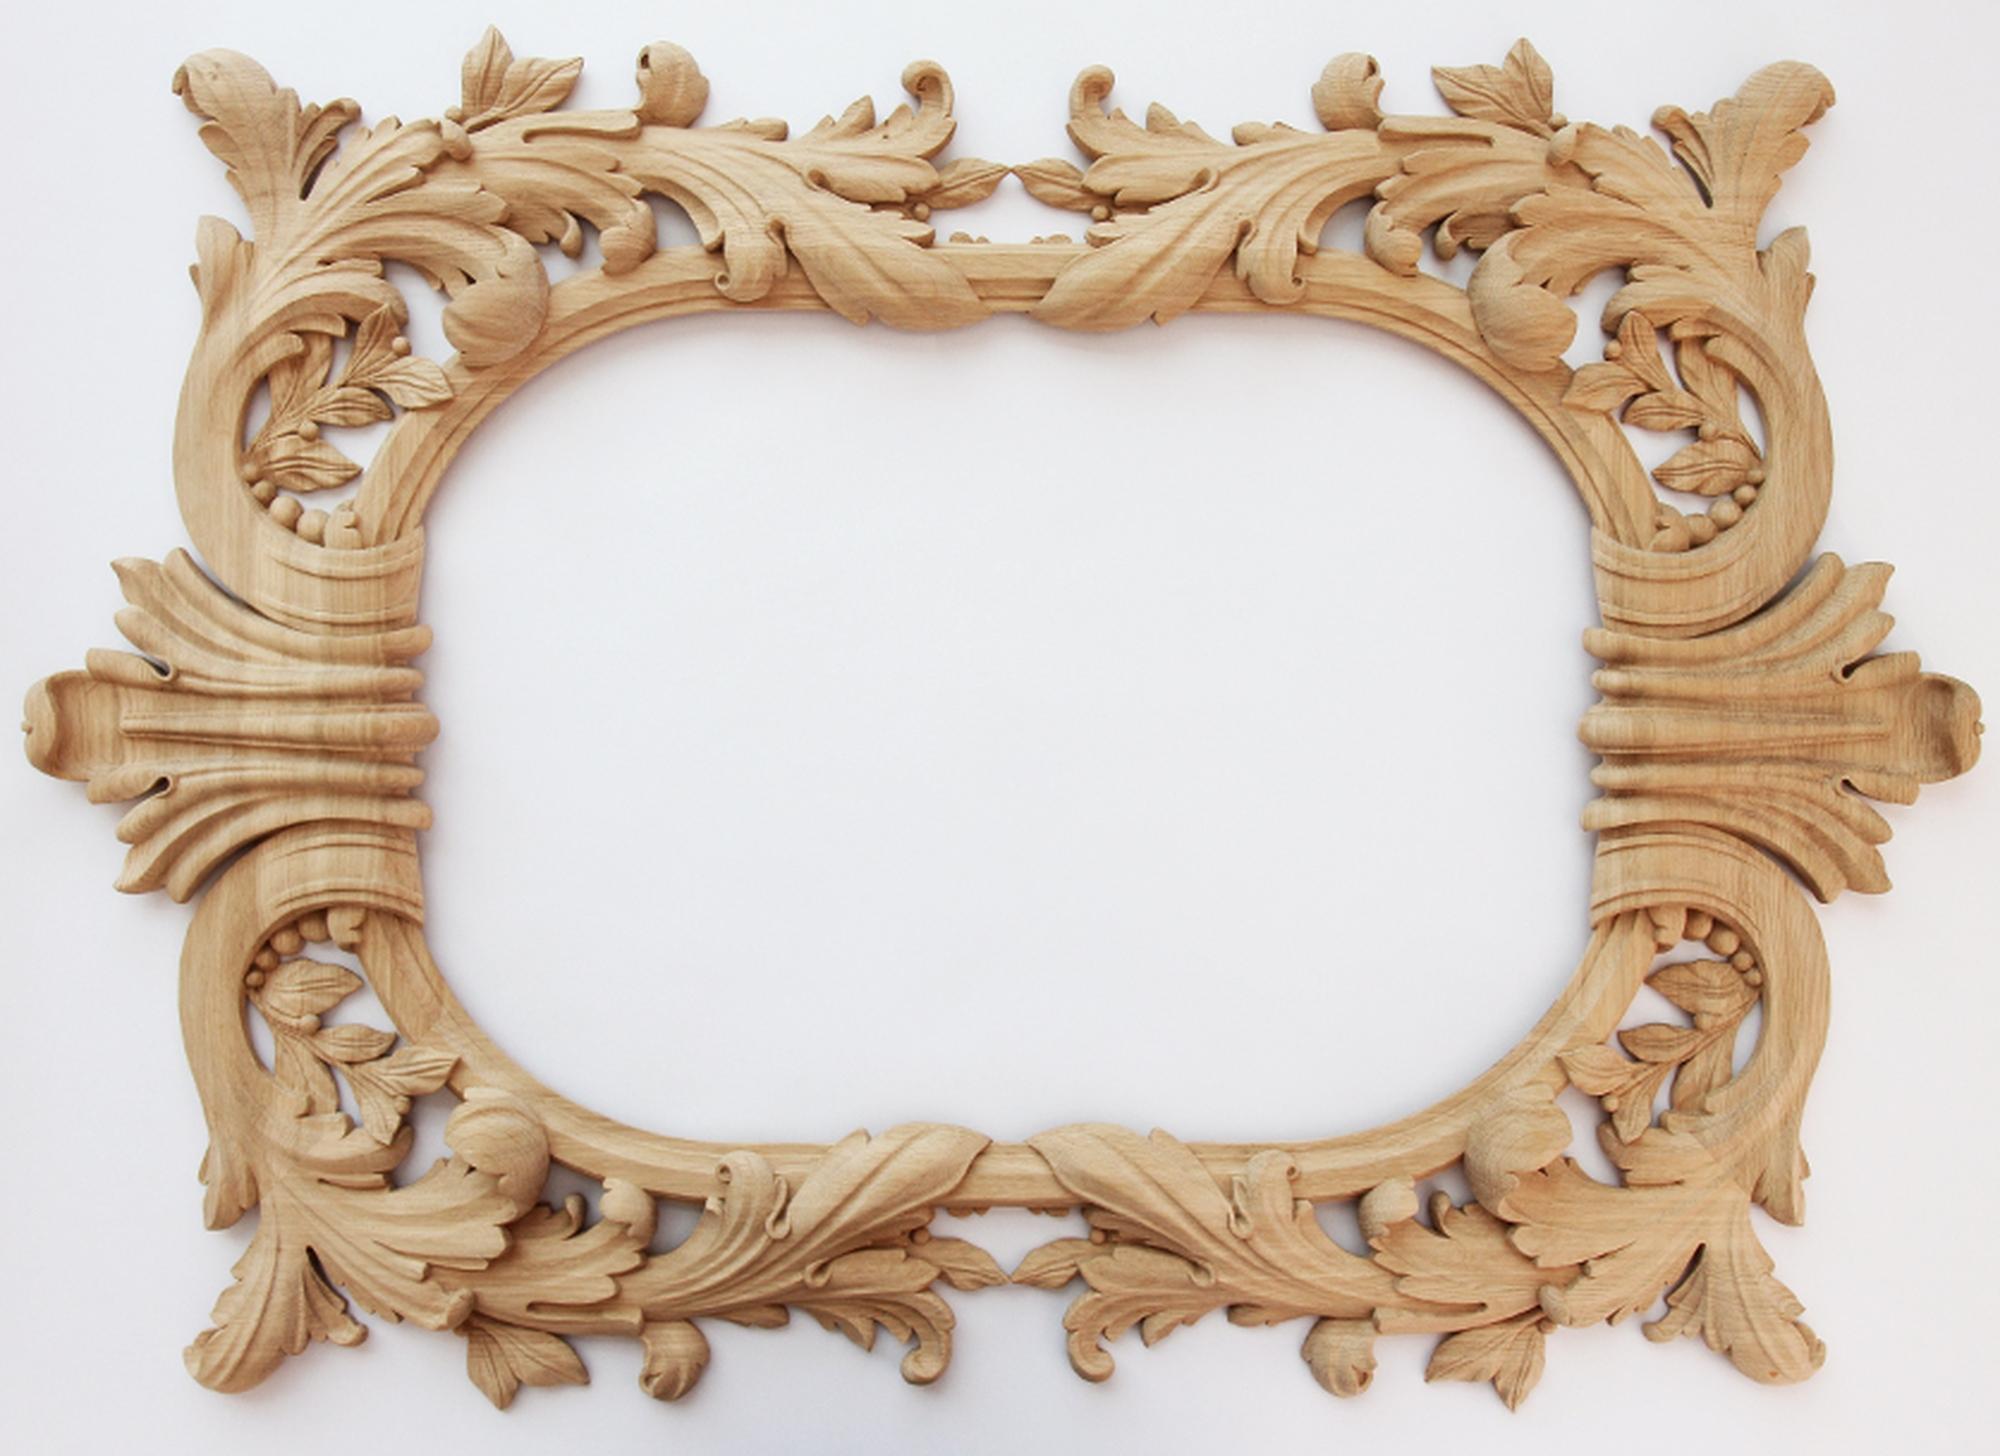 Unfinished high quality wood carving mirror frame from oak or beech of your choice. Unpainted.

>> SKU: RM-007

>> Dimensions: (A x B x C x D x E):

- 31.49